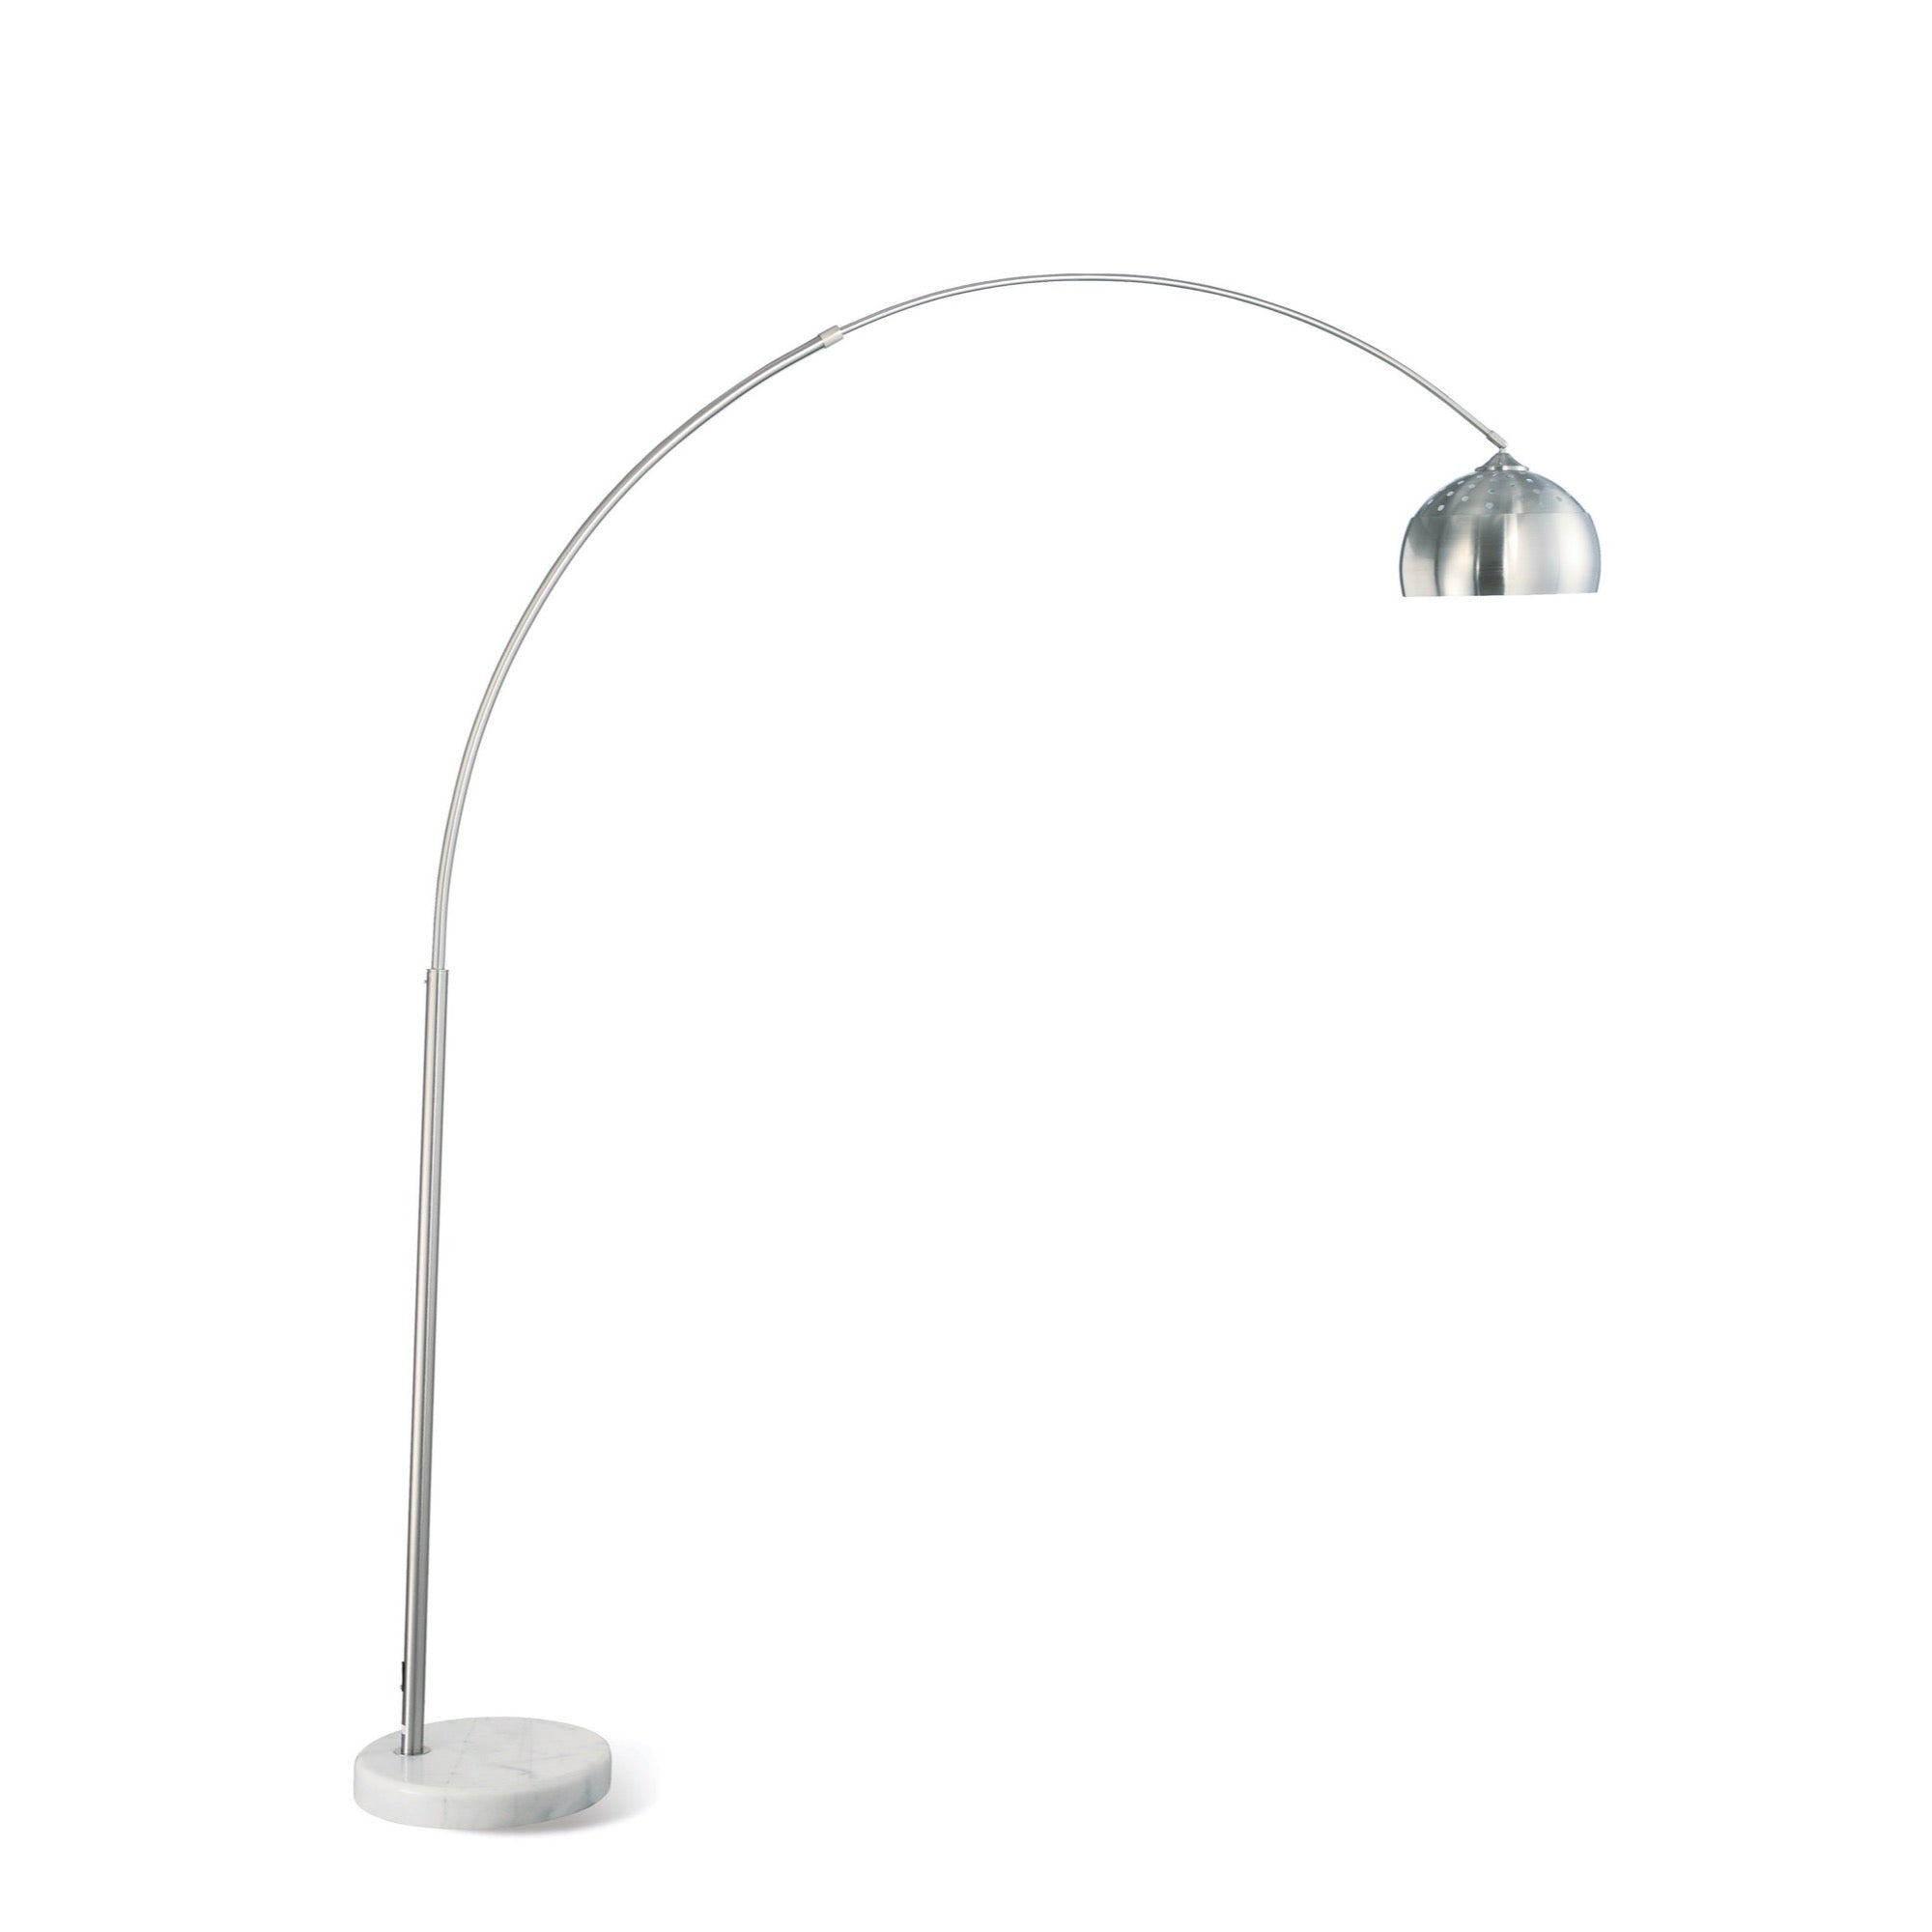 Krester Arched Floor Lamp Brushed Steel and Chrome